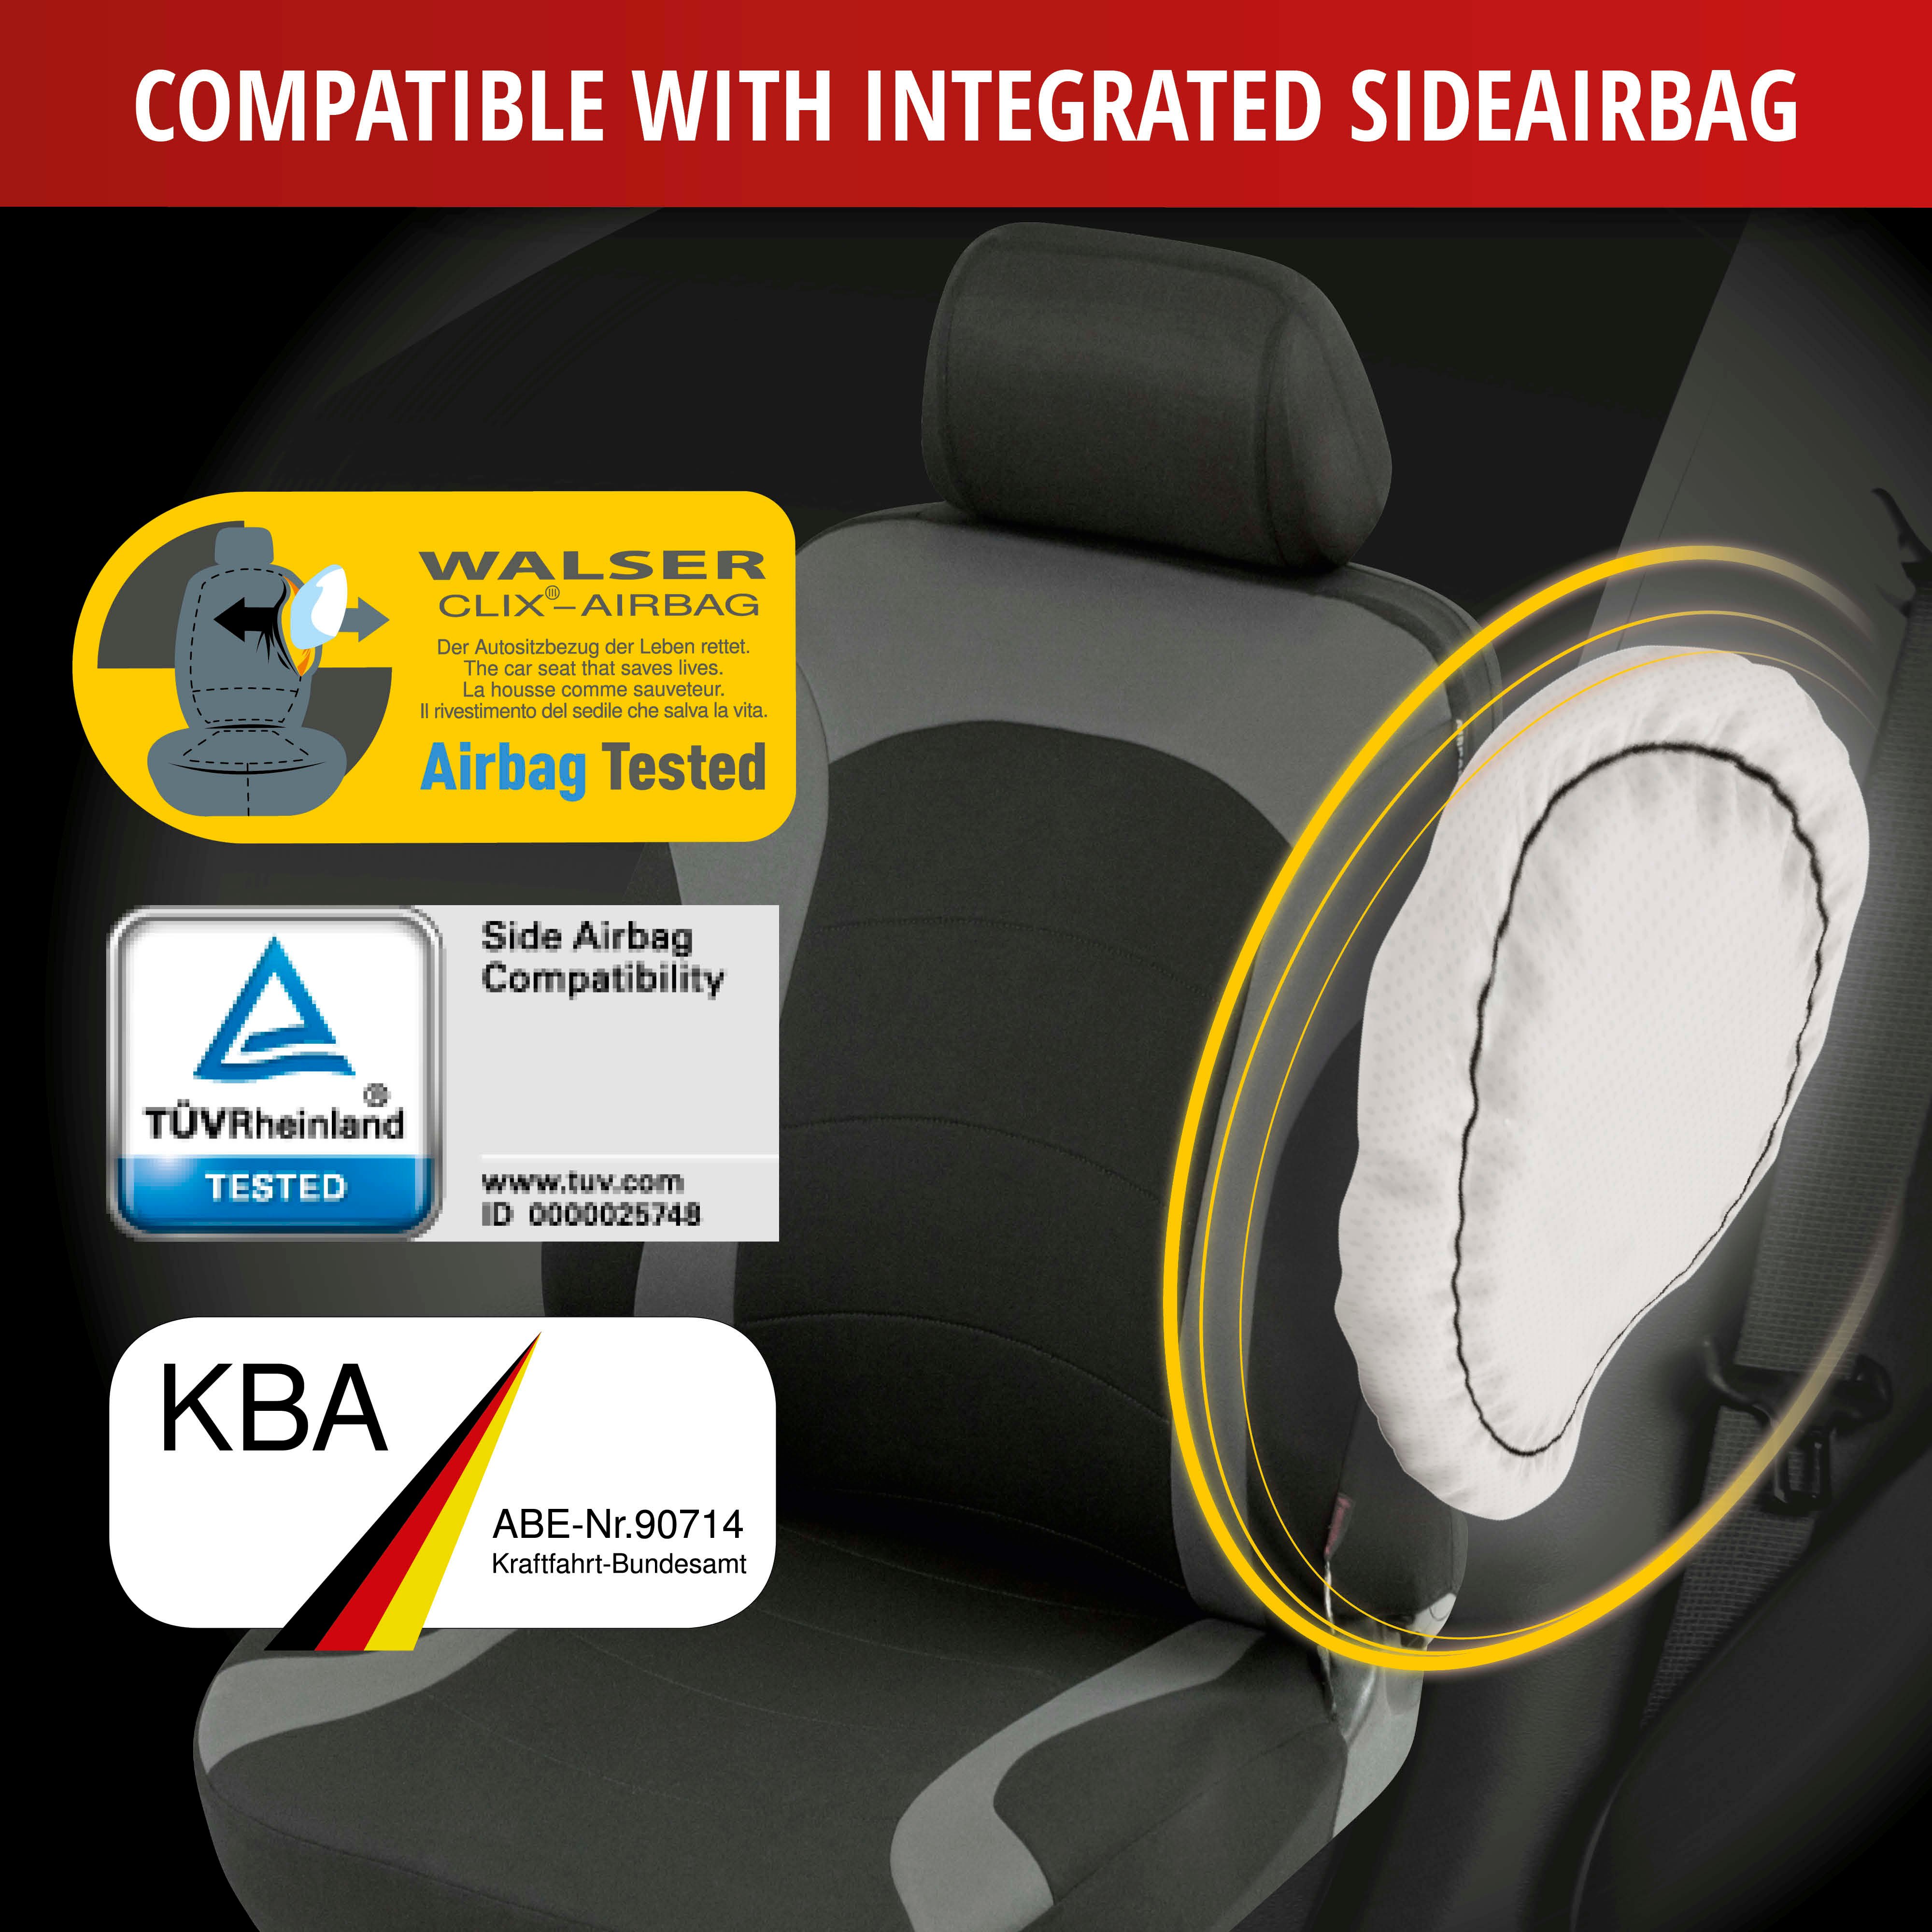 ZIPP IT Premium Inde Car Seat covers for two front seats with zipper system